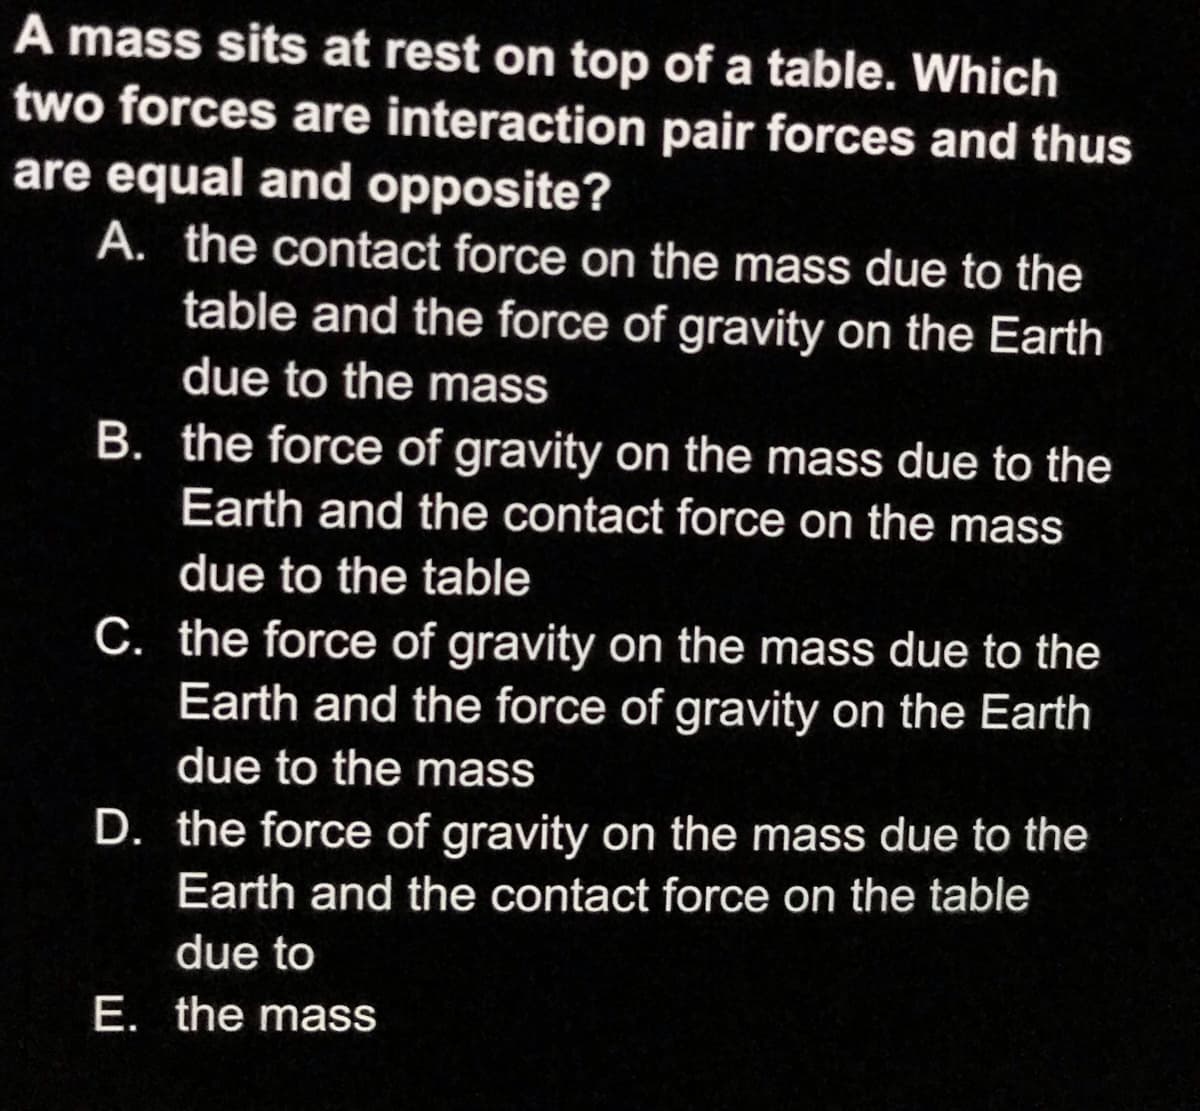 A mass sits at rest on top of a table. Which
two forces are interaction pair forces and thus
are equal and opposite?
A. the contact force on the mass due to the
table and the force of gravity on the Earth
due to the mass
B. the force of gravity on the mass due to the
Earth and the contact force on the mass
due to the table
C. the force of gravity on the mass due to the
Earth and the force of gravity on the Earth
due to the mass
D. the force of gravity on the mass due to the
Earth and the contact force on the table
due to
E. the mass